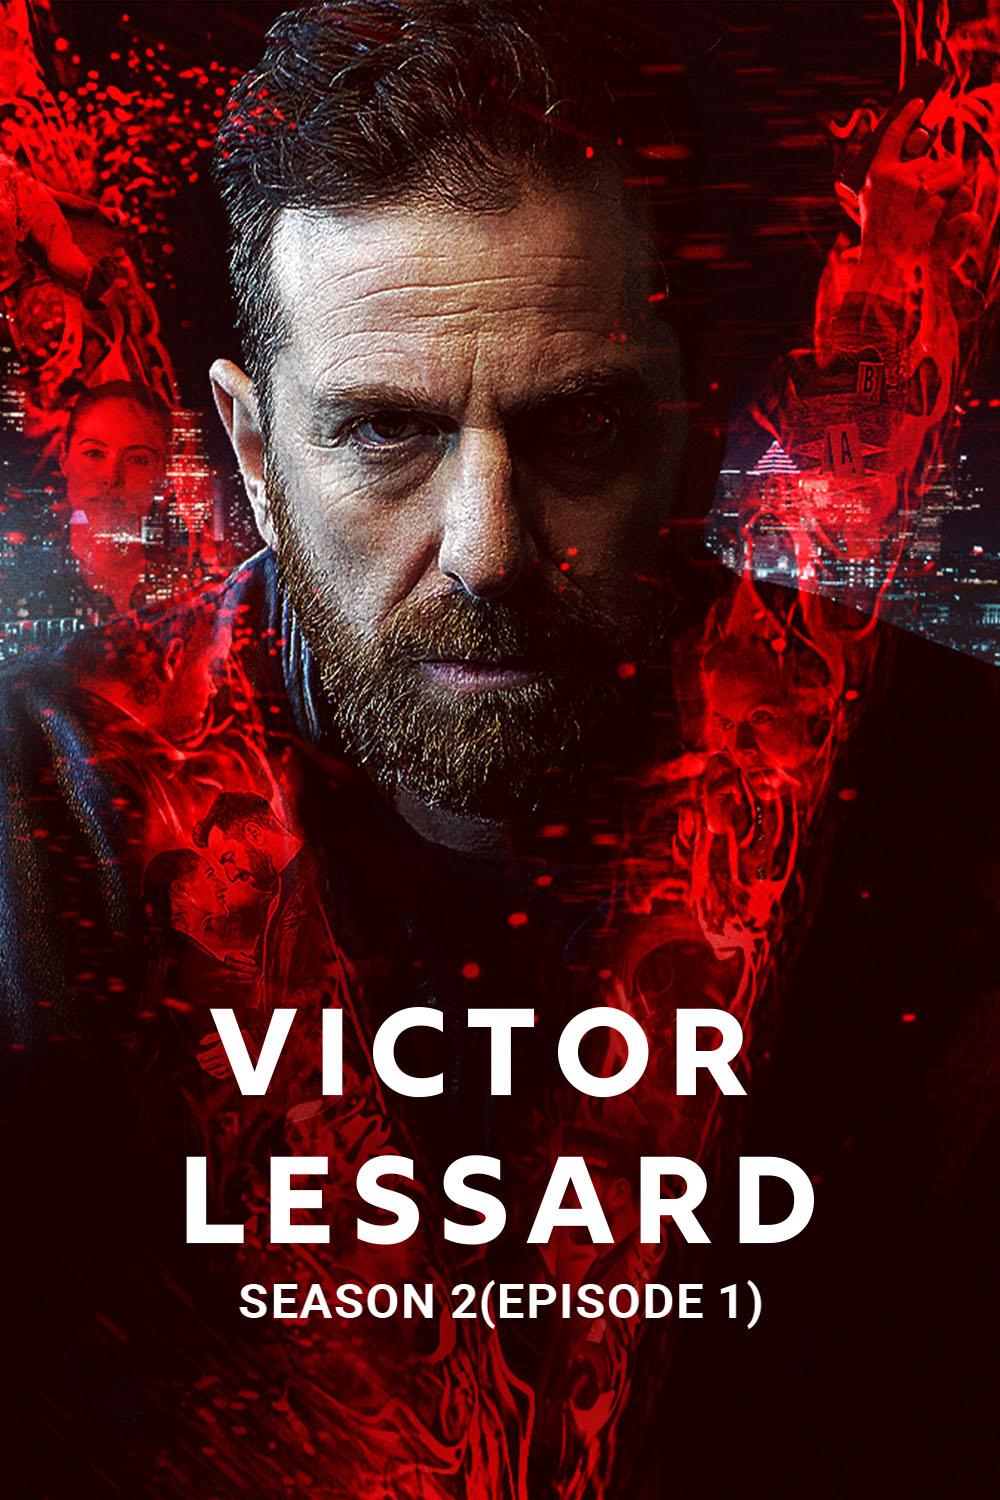 Victor Lessard (2018) 720p-480p HEVC HDRip S02 Complete [Dual Audio] [Hindi or French] x265 ESubs